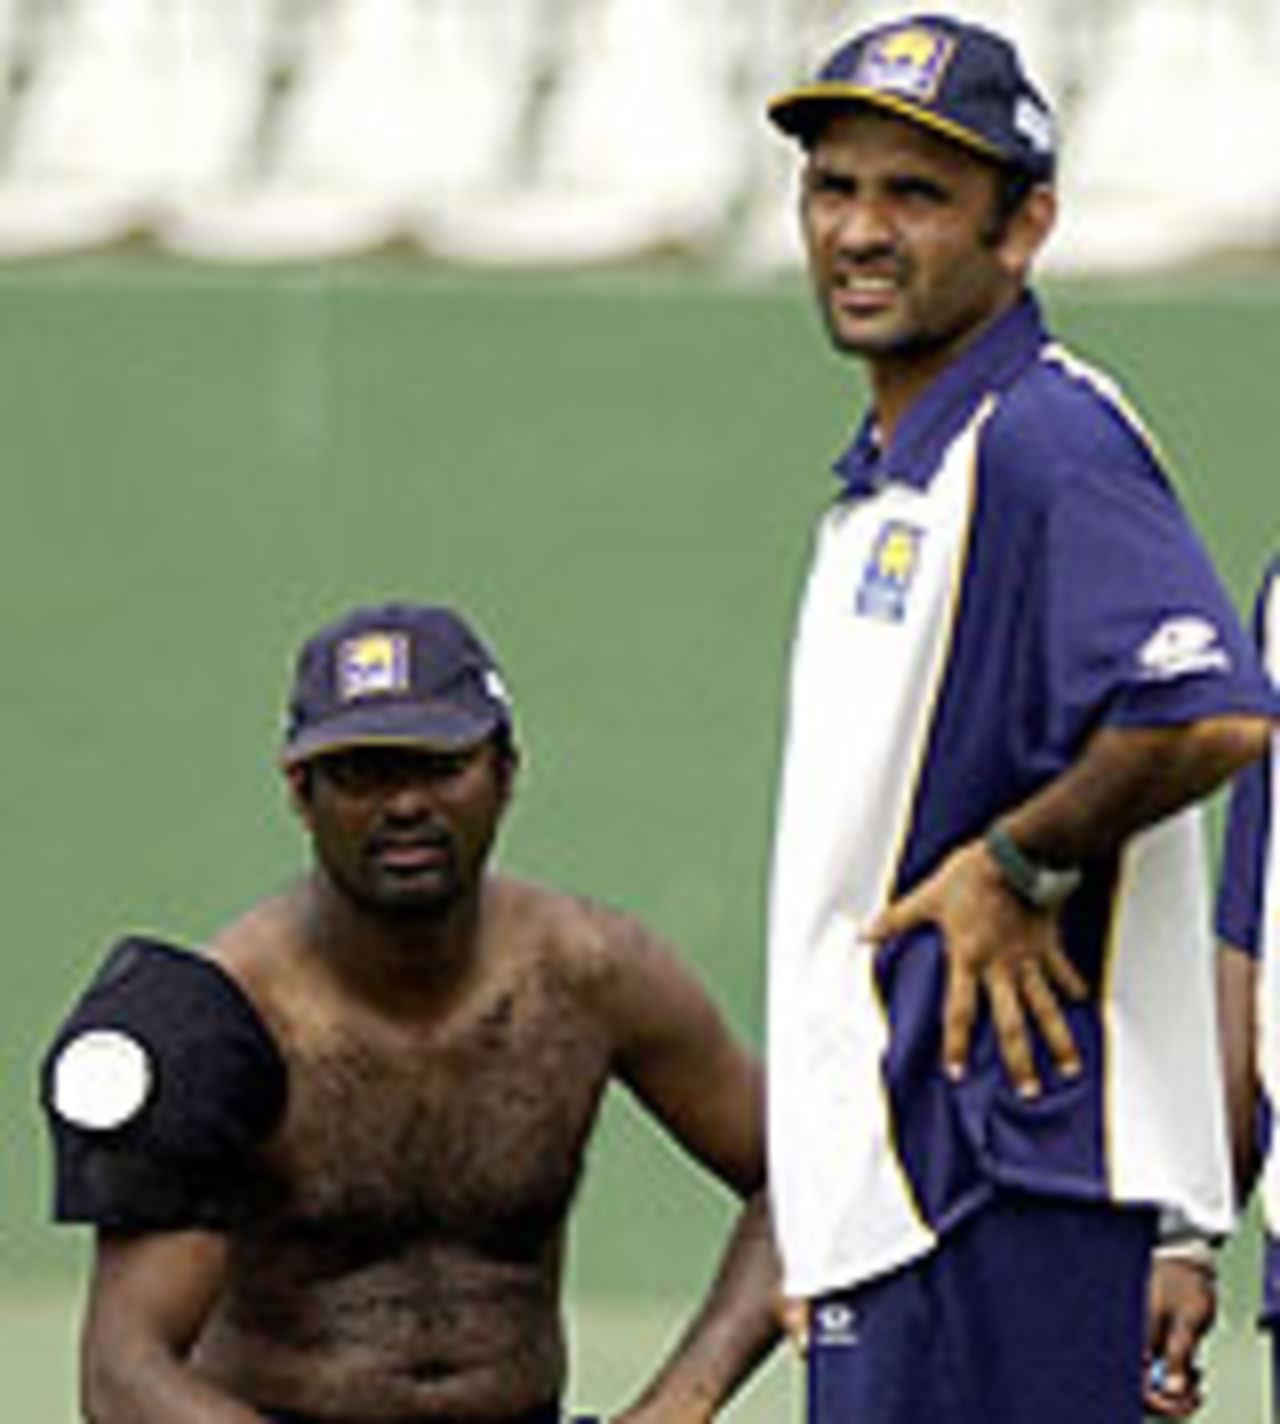 Muttiah Muralitharan pulled out with a shoulder injury, Sri Lanka v South Africa, Colombo, August 11